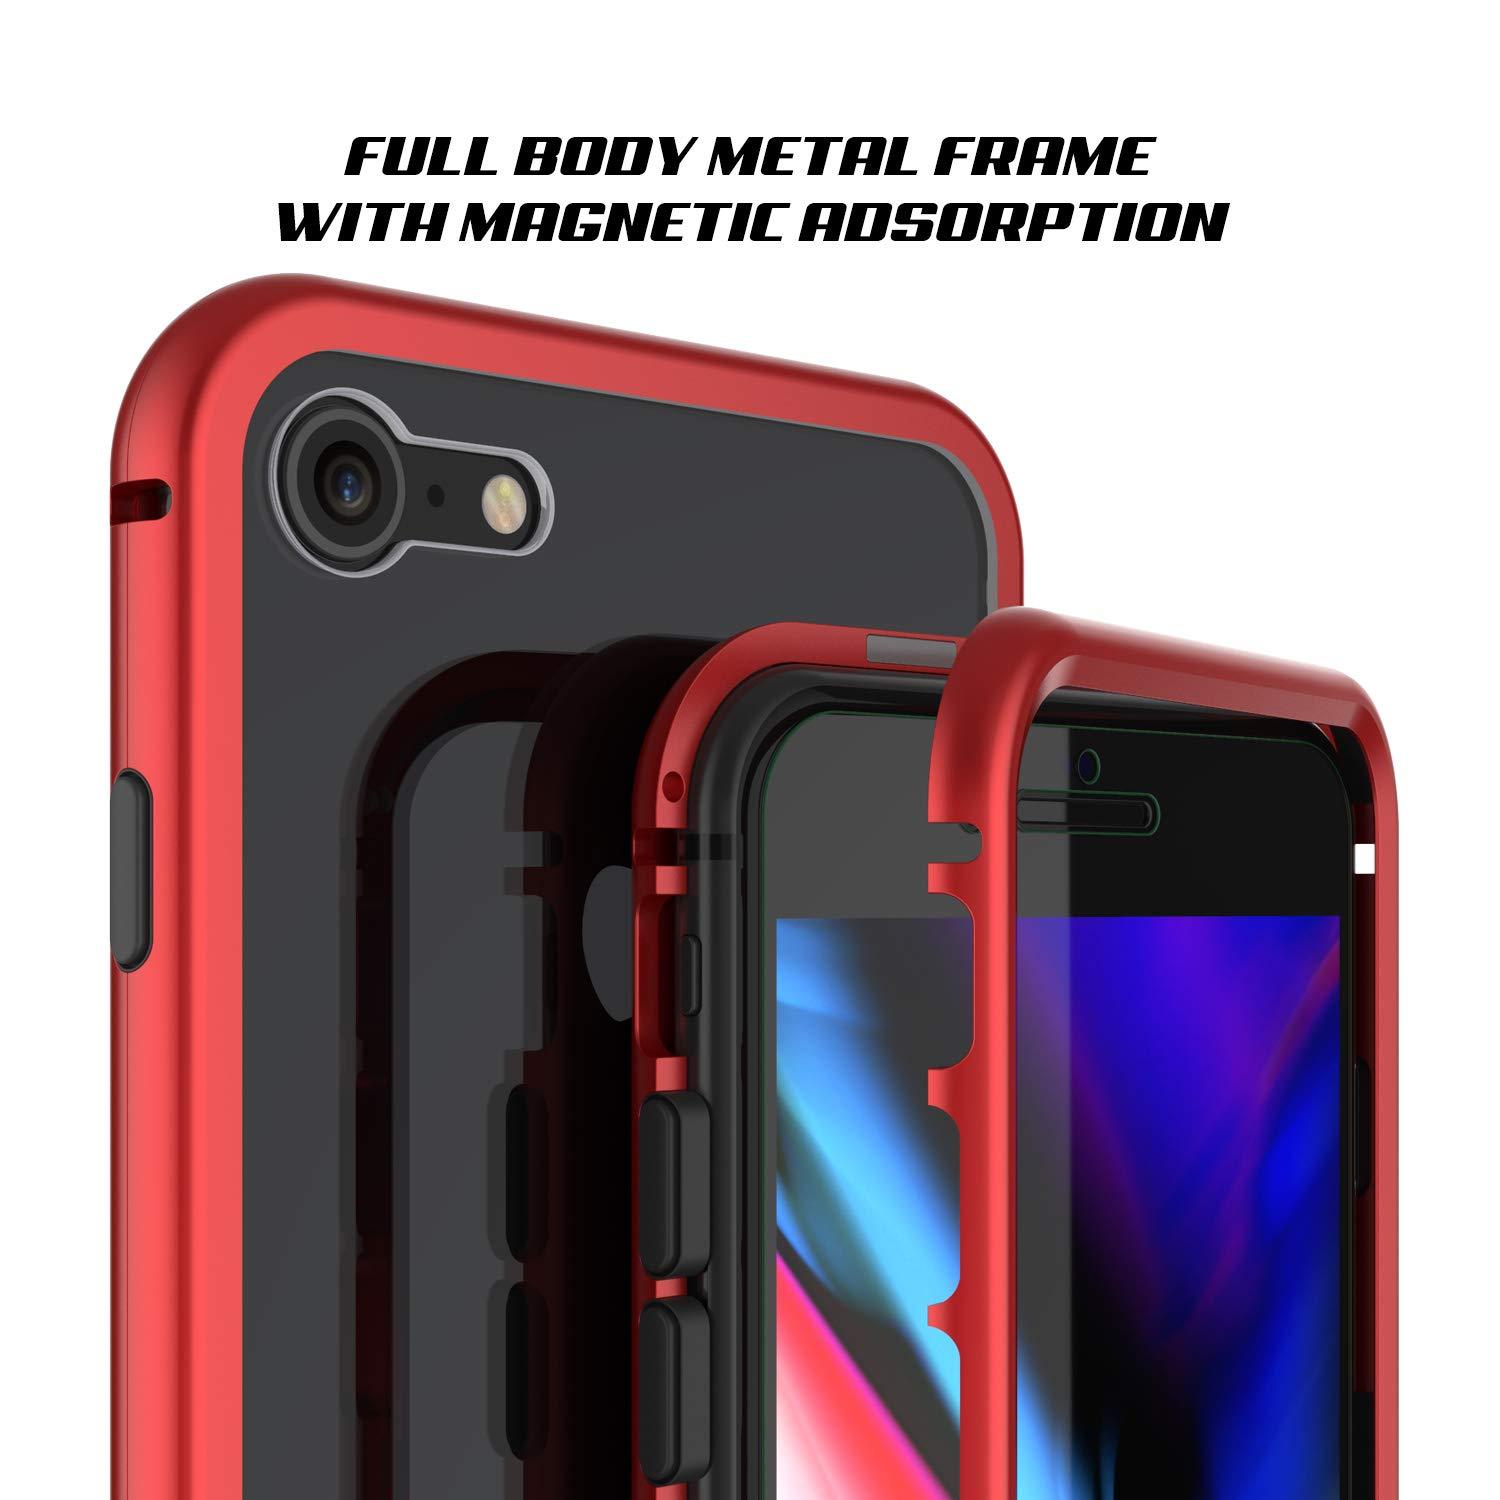 iPhone 8 Case, Punkcase Magnetix 2.0 Protective TPU Cover W/ Tempered Glass Screen Protector [Red]